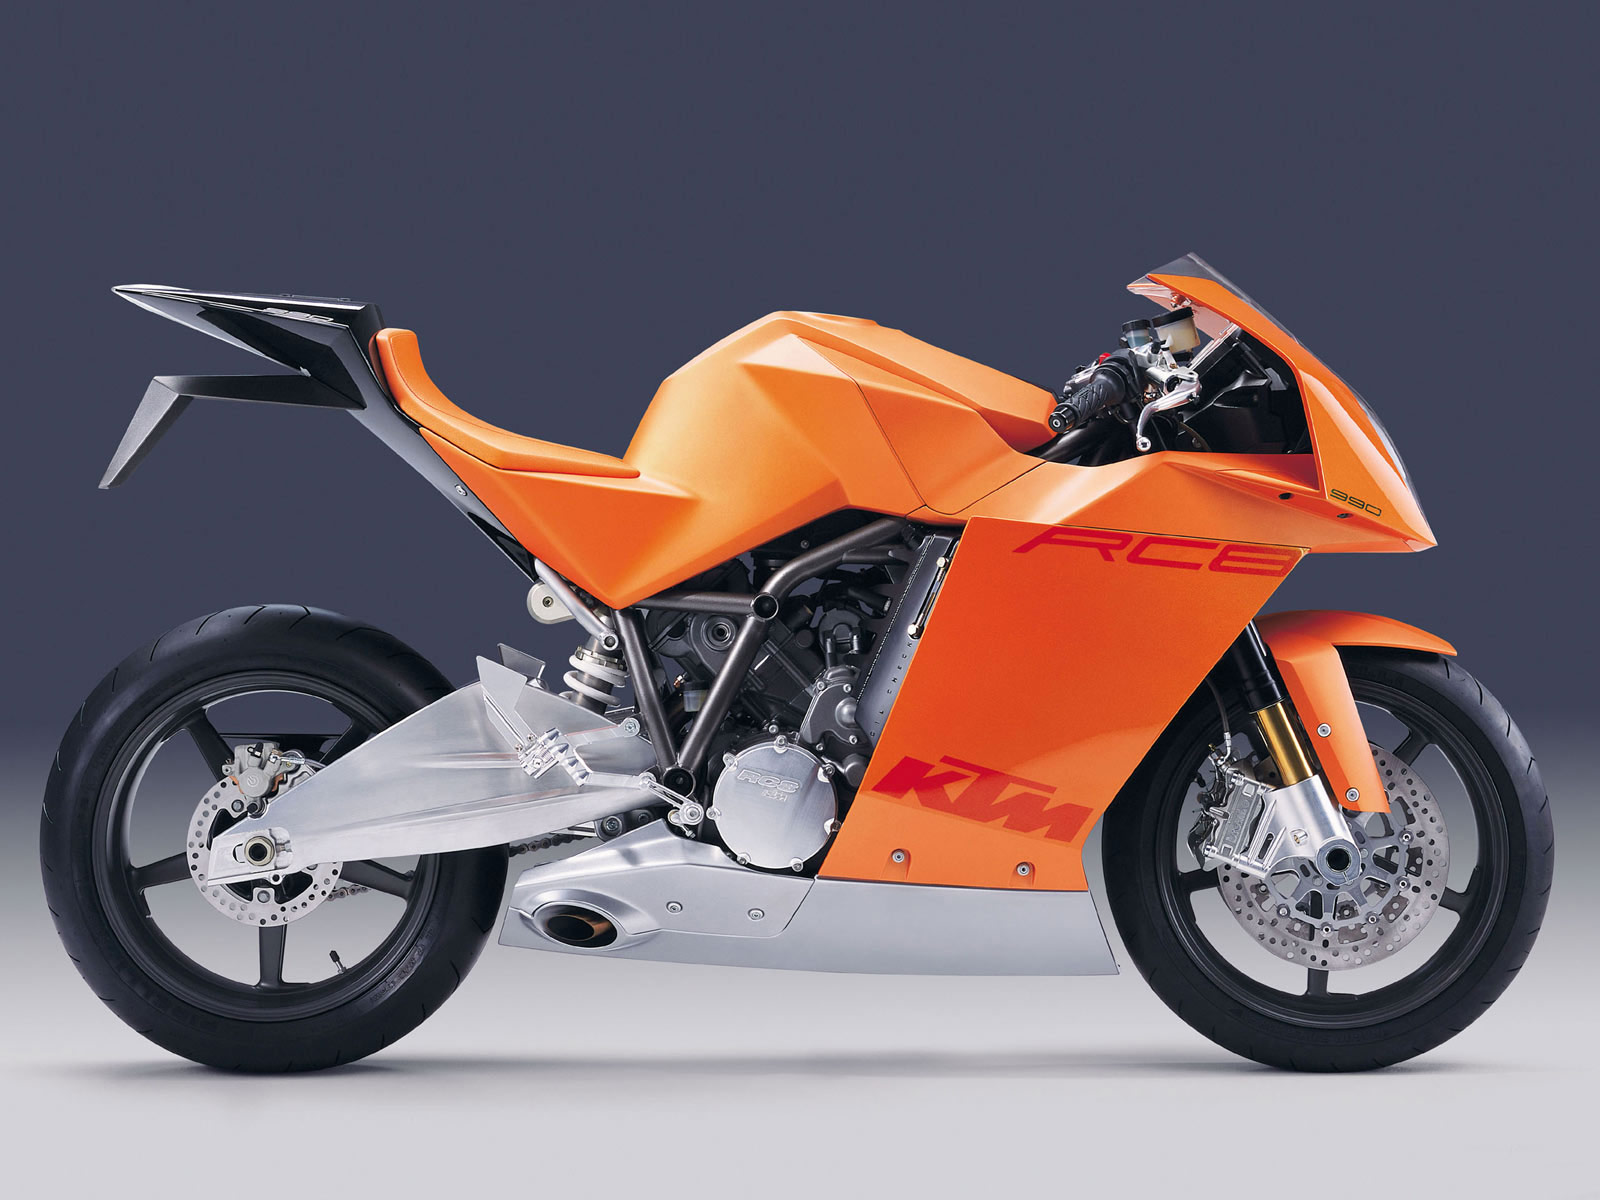 KTM 990 RC8 Concept motorcycle wallpaper. Insurance information